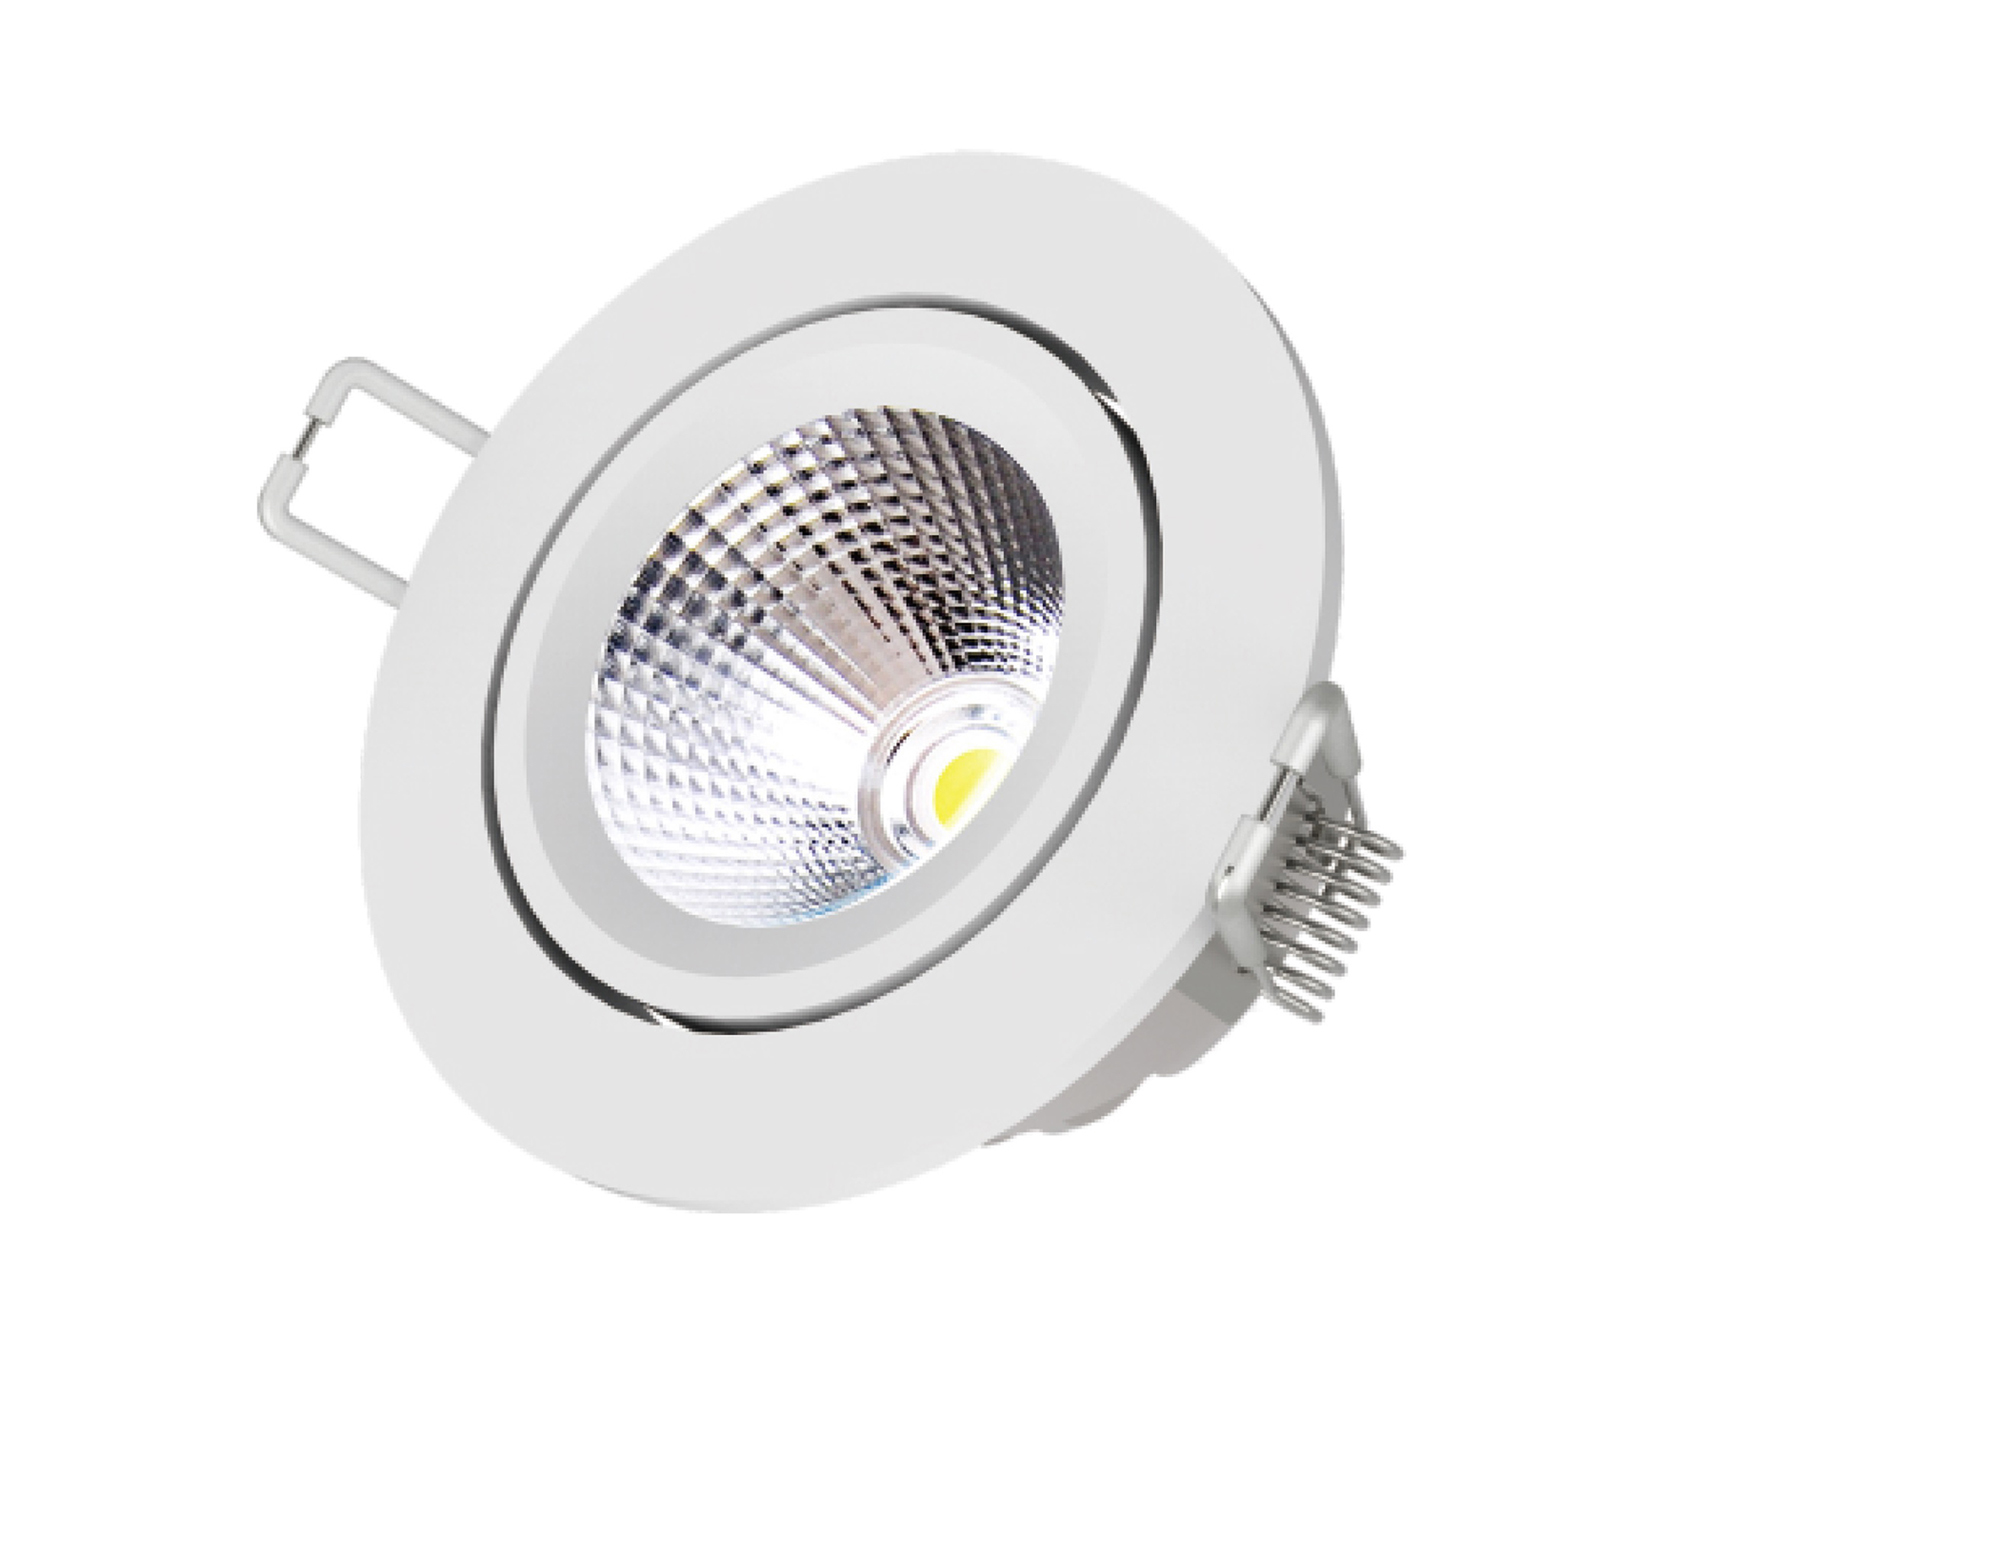 SD-09R-Y  Smart Spot light, RF 2.4GHz, 9W, Dimmable, 3000K, 24 degree beam angle, 200-240Vac, F95mm cut-out, IP20.